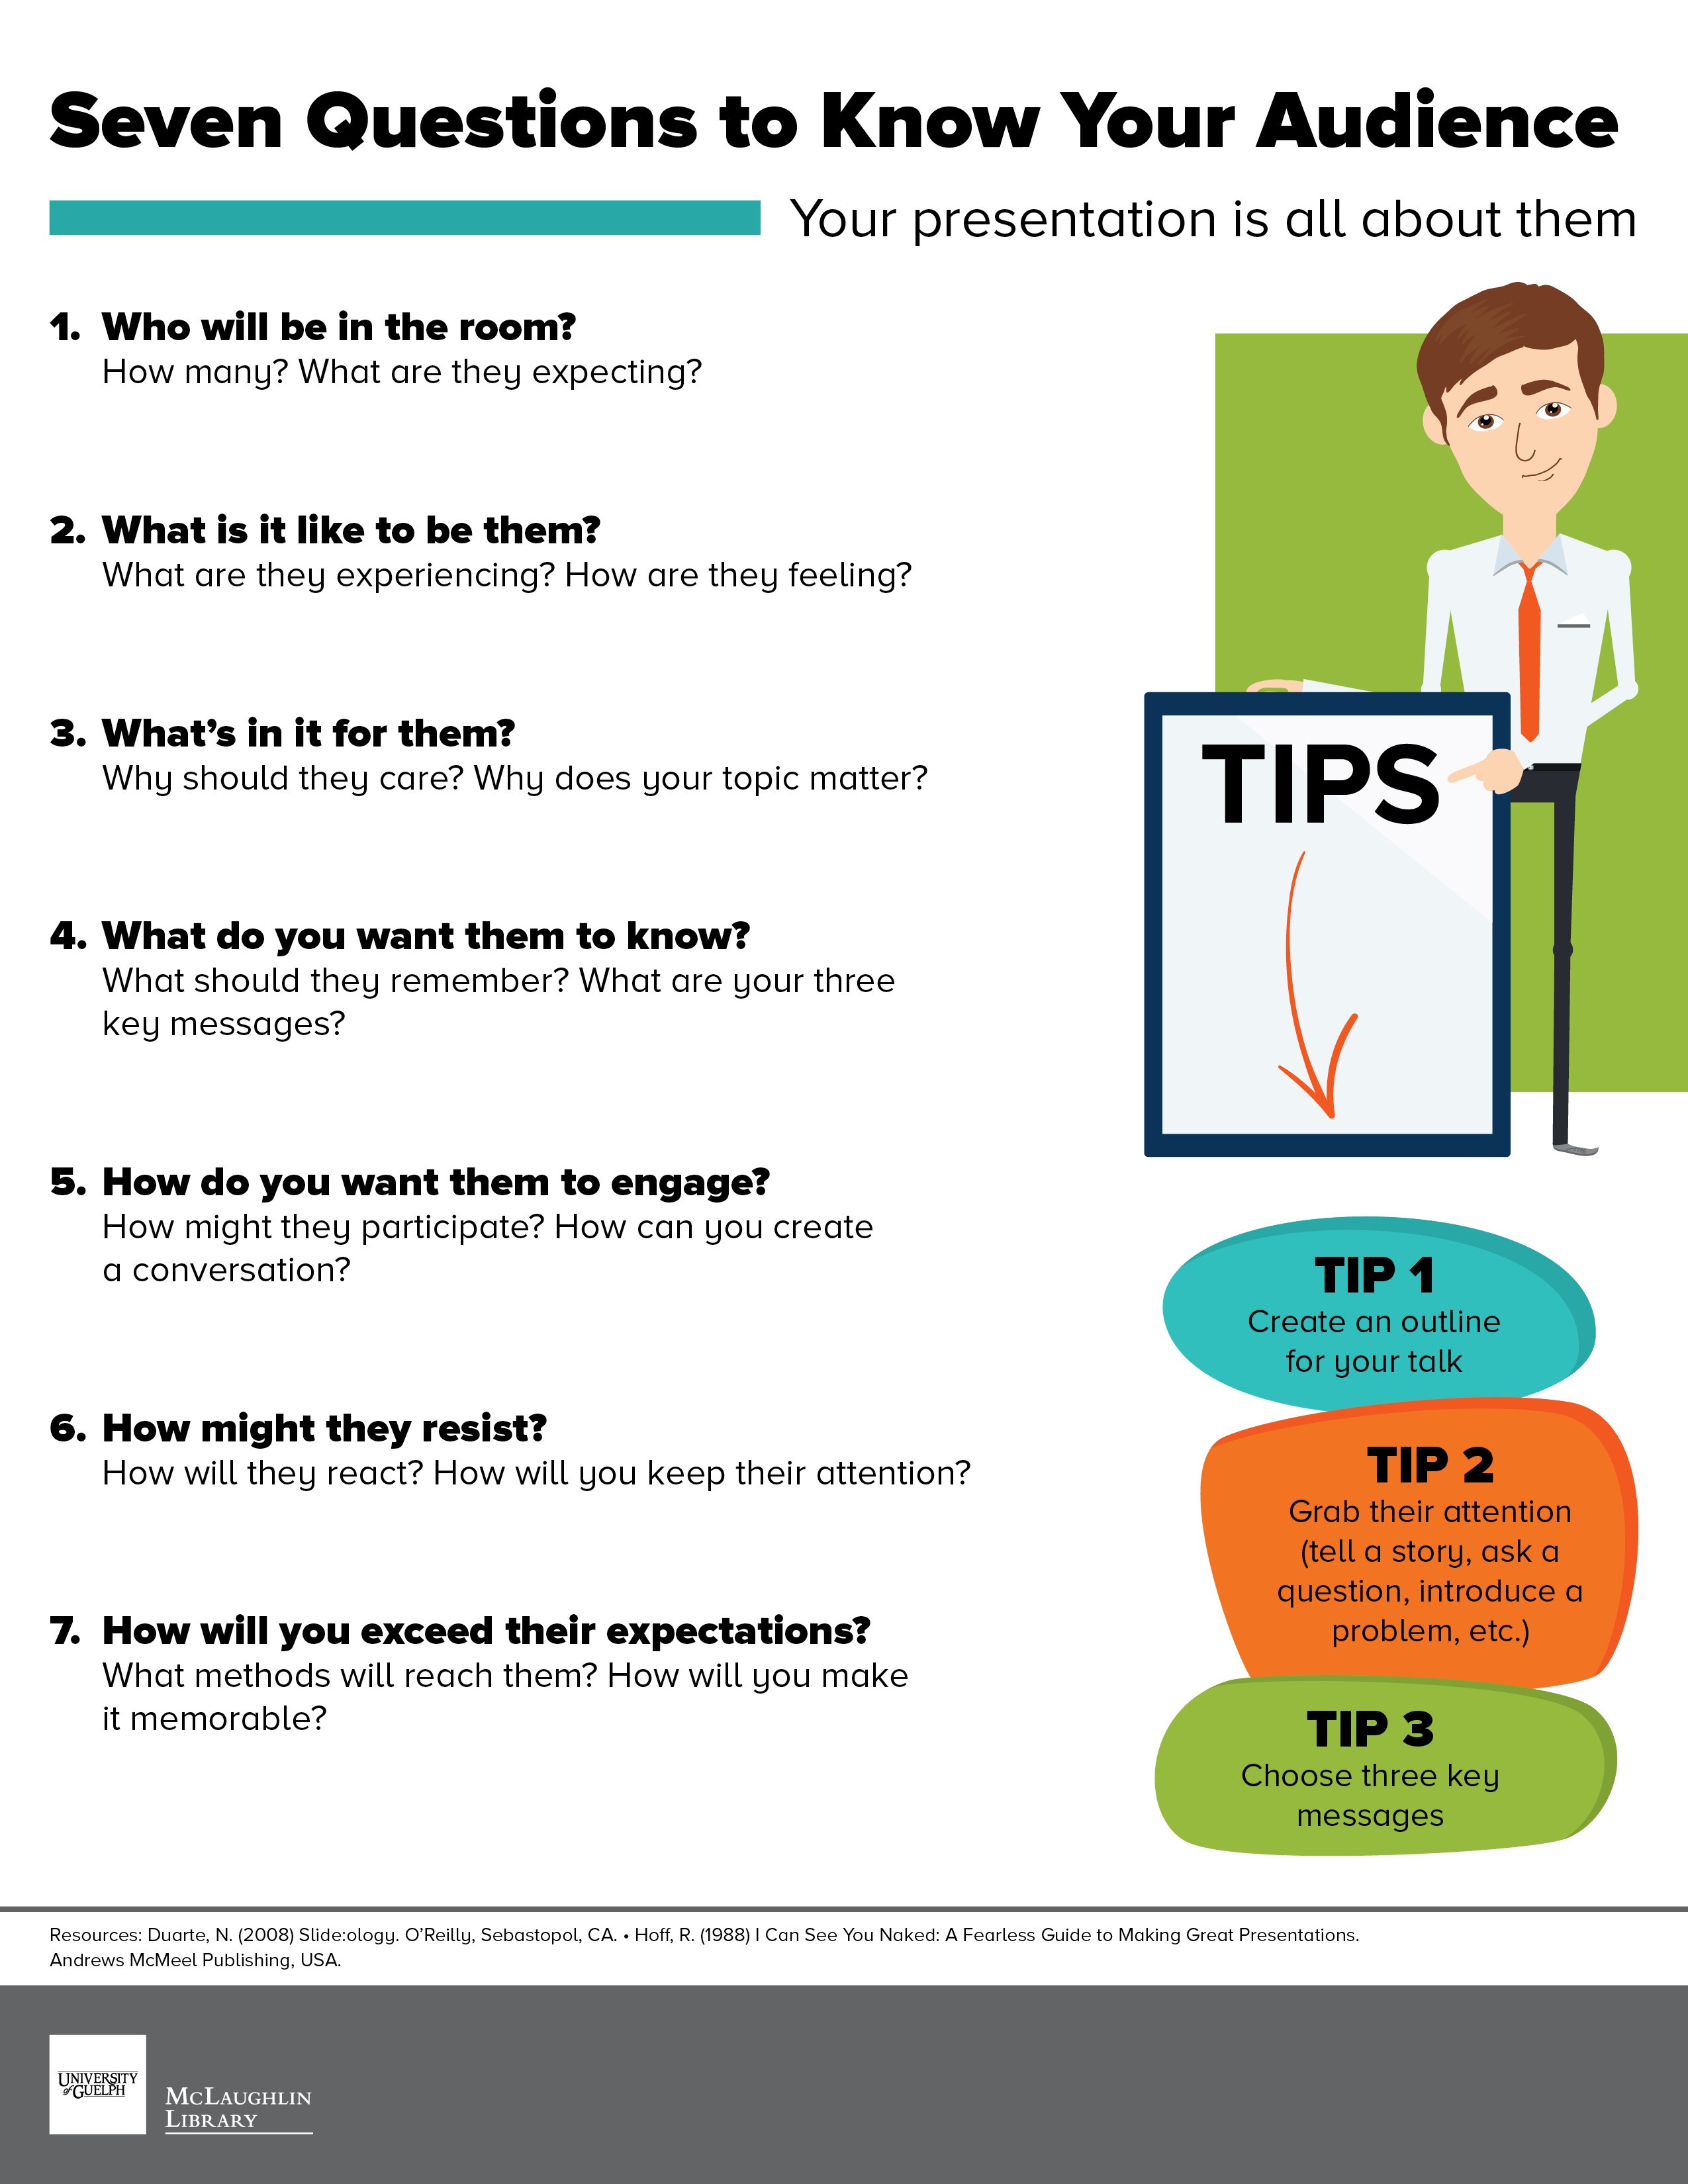 Seven Questions to Know Your Audience. Transcript available below.